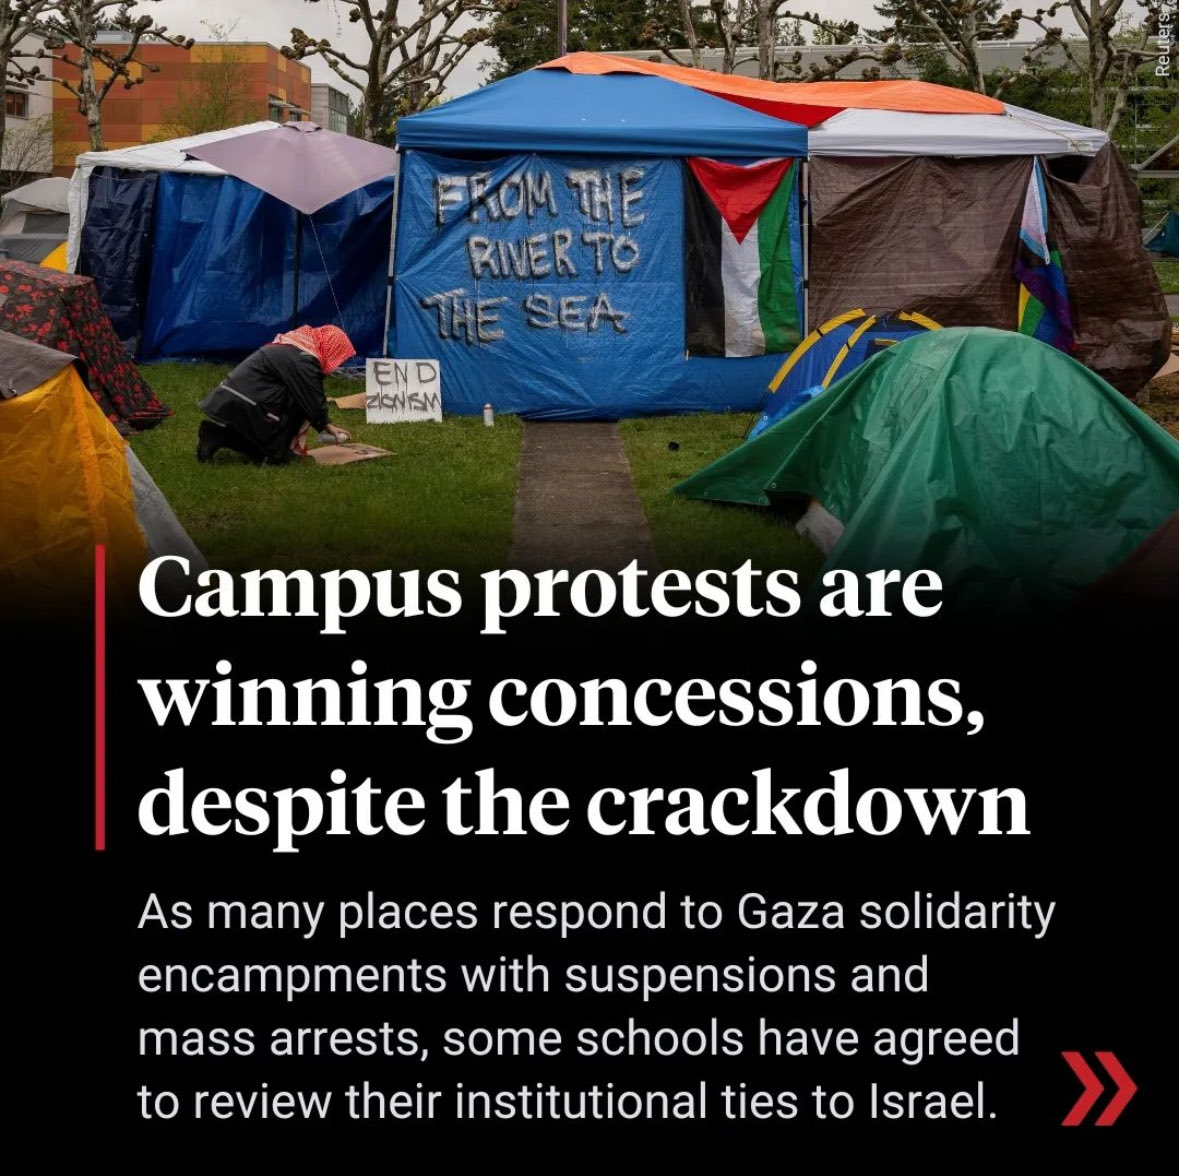 BREAKING: Although mostly ignored by the media, student protesters have won big victories at 6 major US universities over Israel's mass civilian killings in Gaza. Agreements reached at Rutgers, Northwestern, Brown, Middlebury, Evergreen and Vassar. Protest works. More to come.⤵️